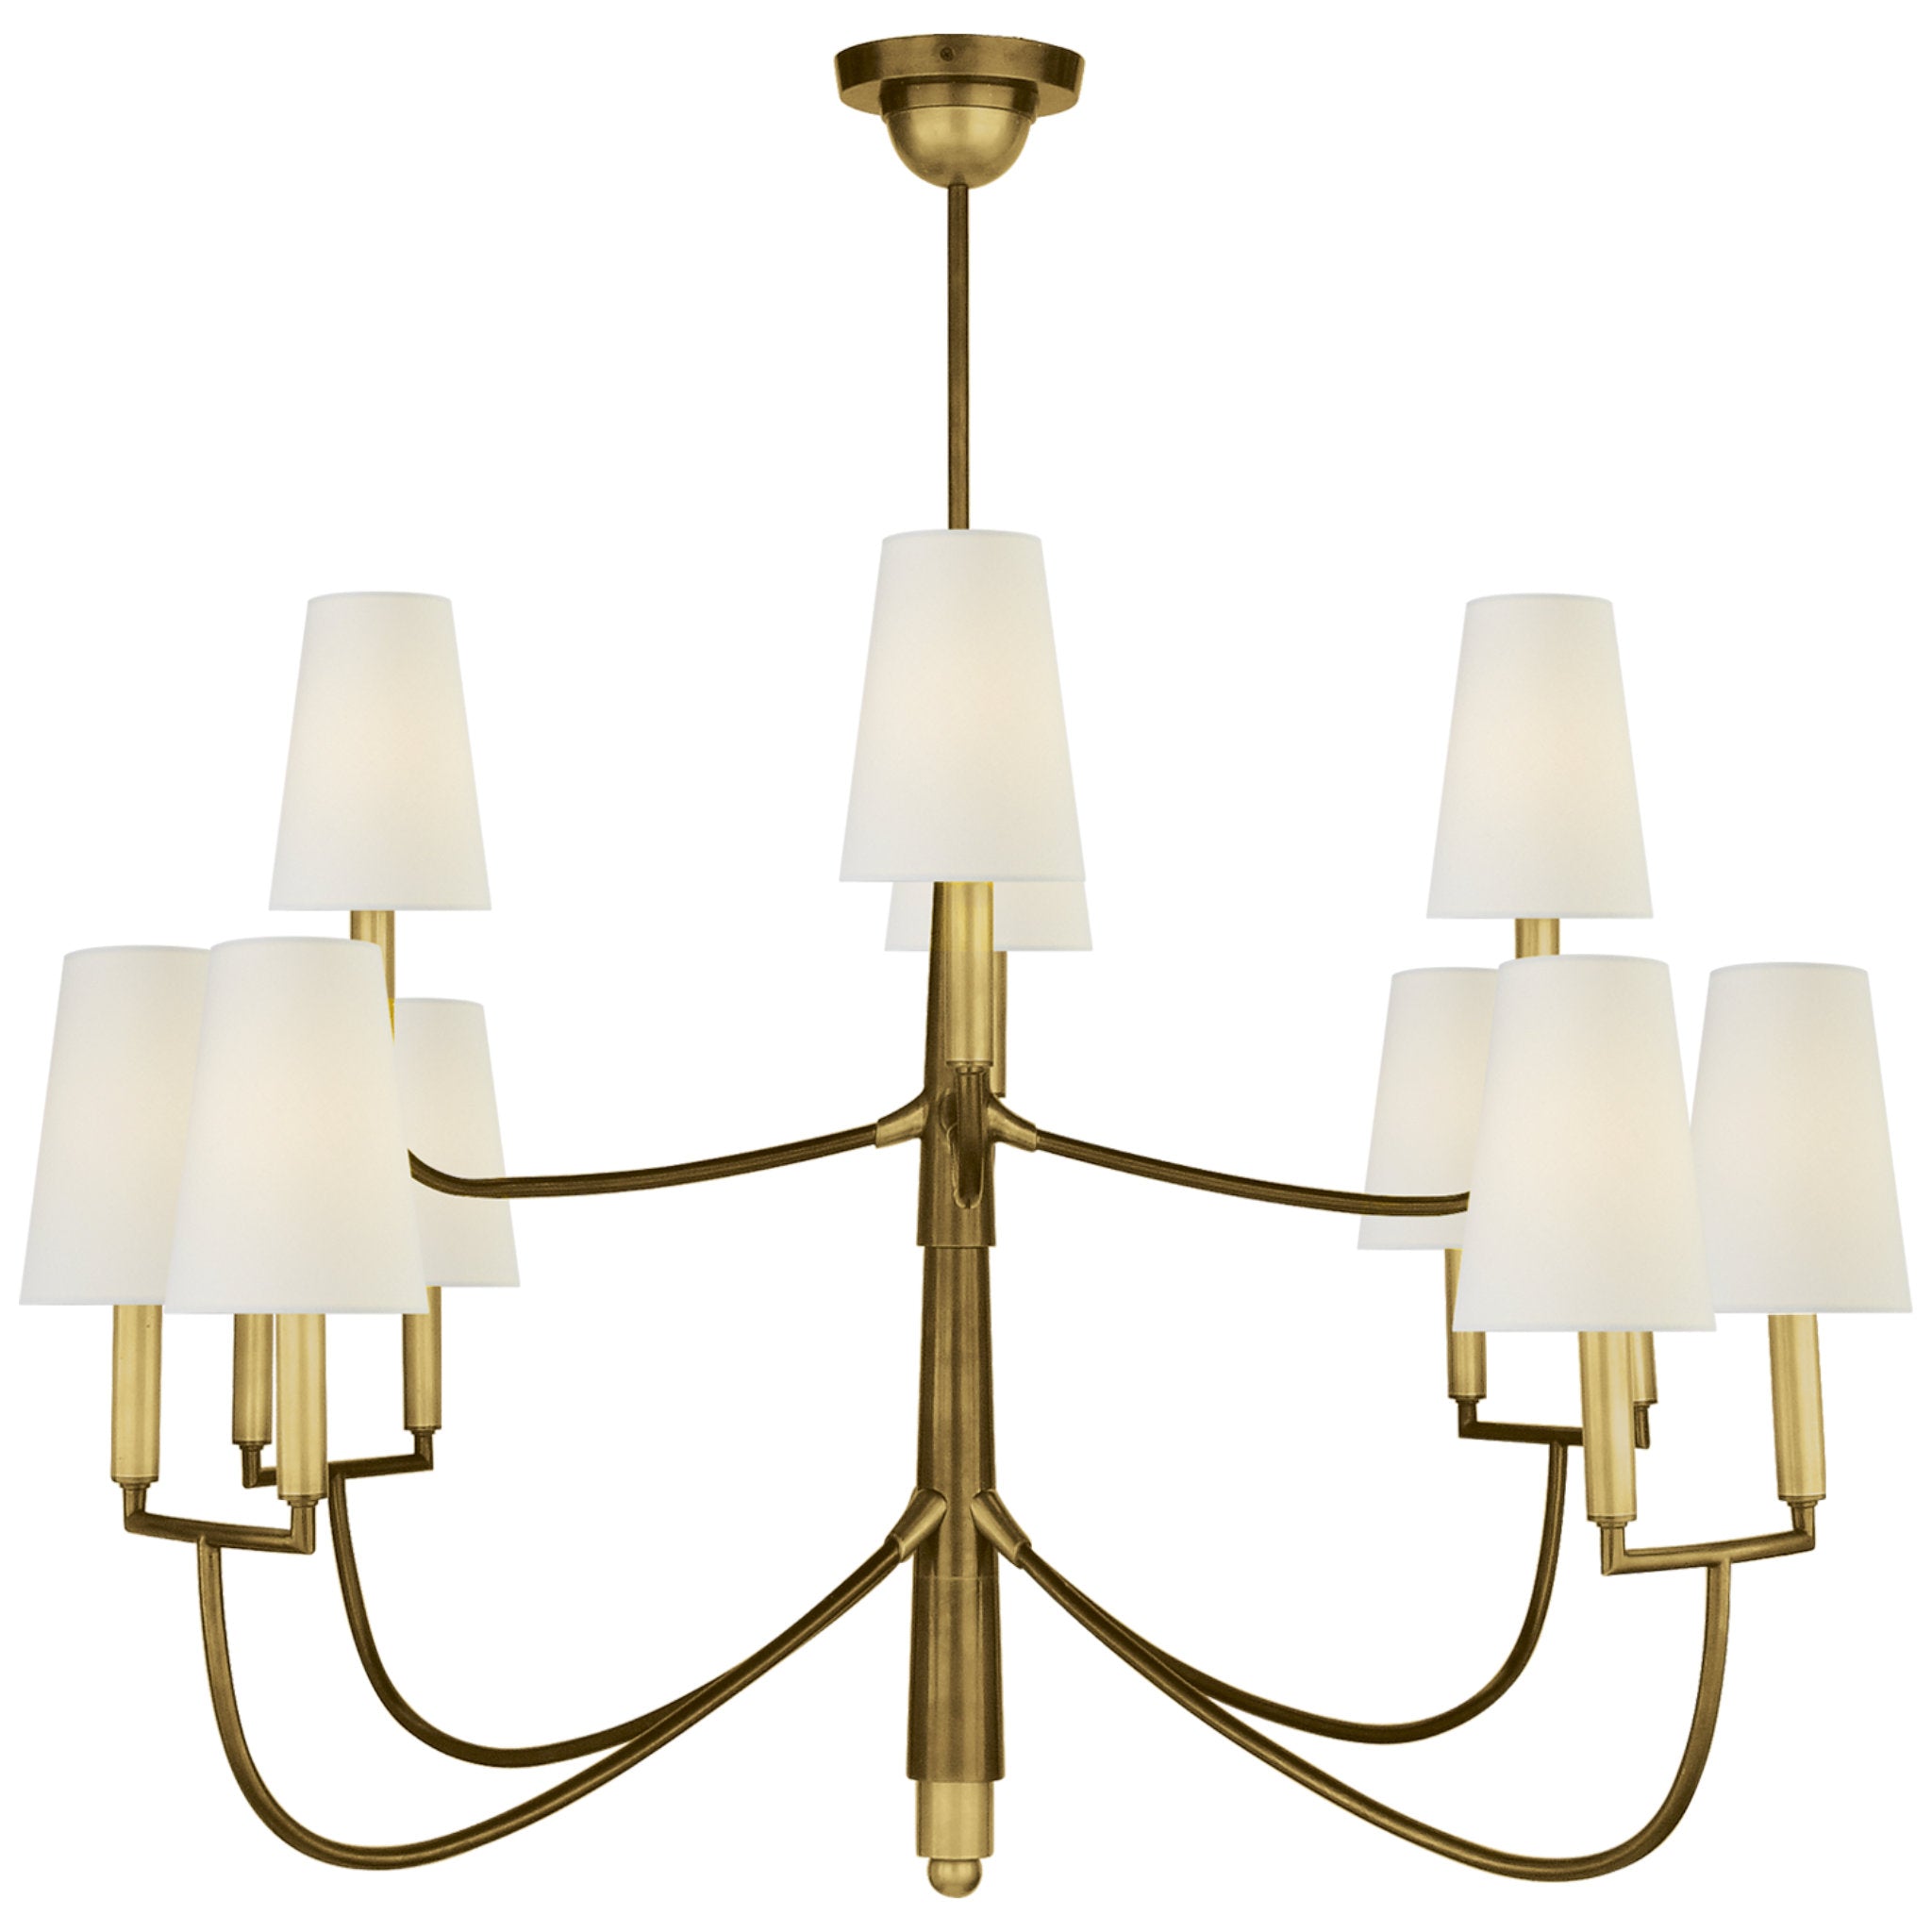 Thomas O'Brien Farlane Large Chandelier in Hand-Rubbed Antique Brass with Linen Shades